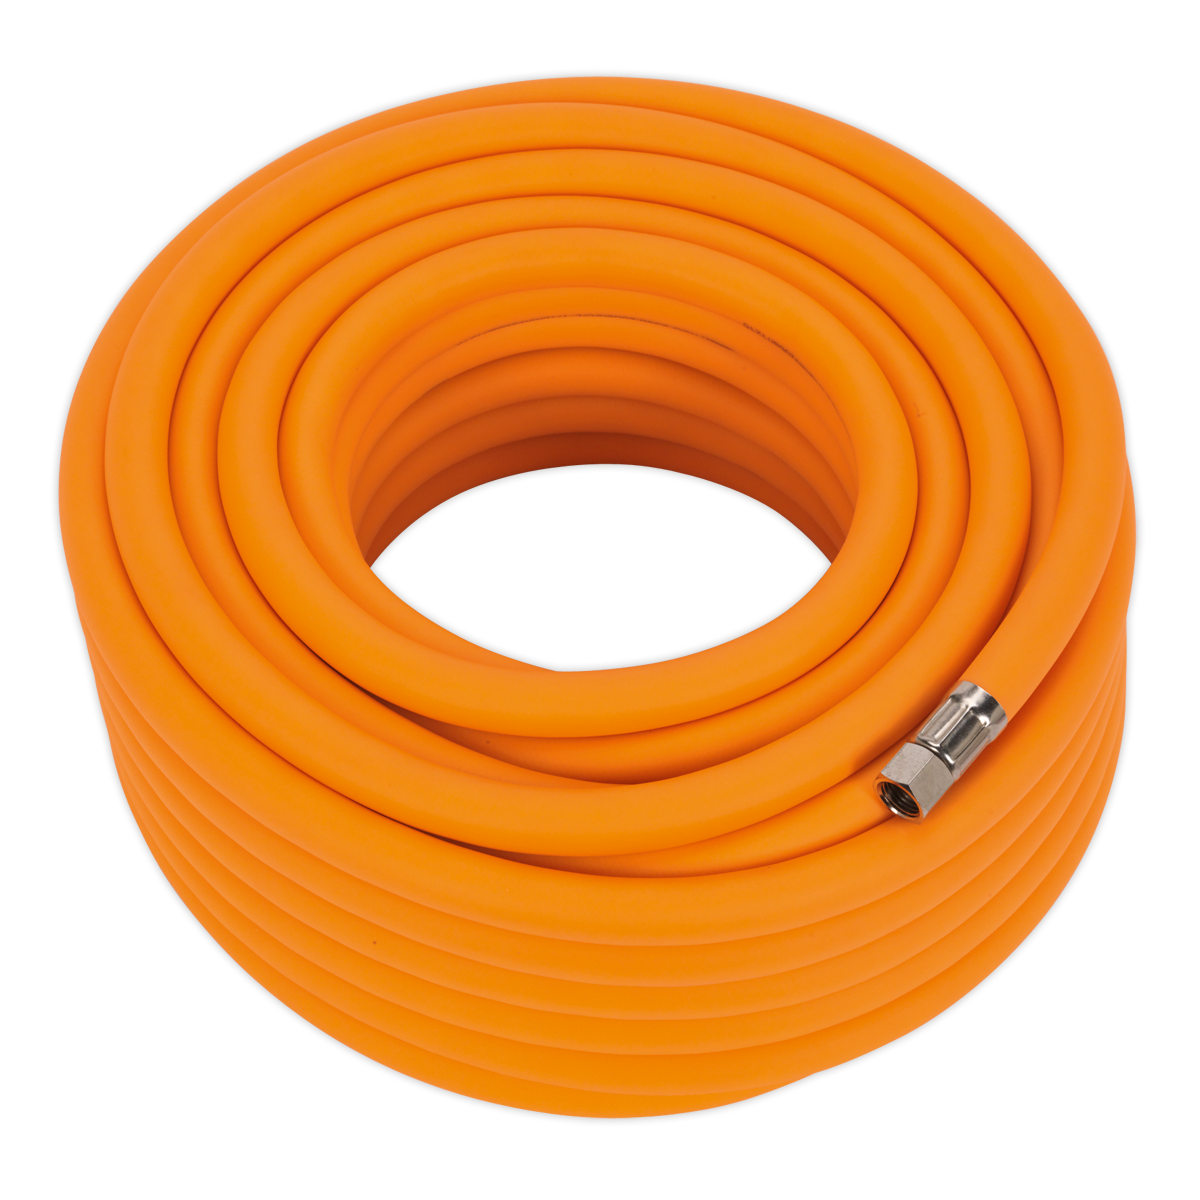 Sealey AHHC2038 Air Hose 20m x 10mm Hybrid High Visibility with 1/4"BSP Unions